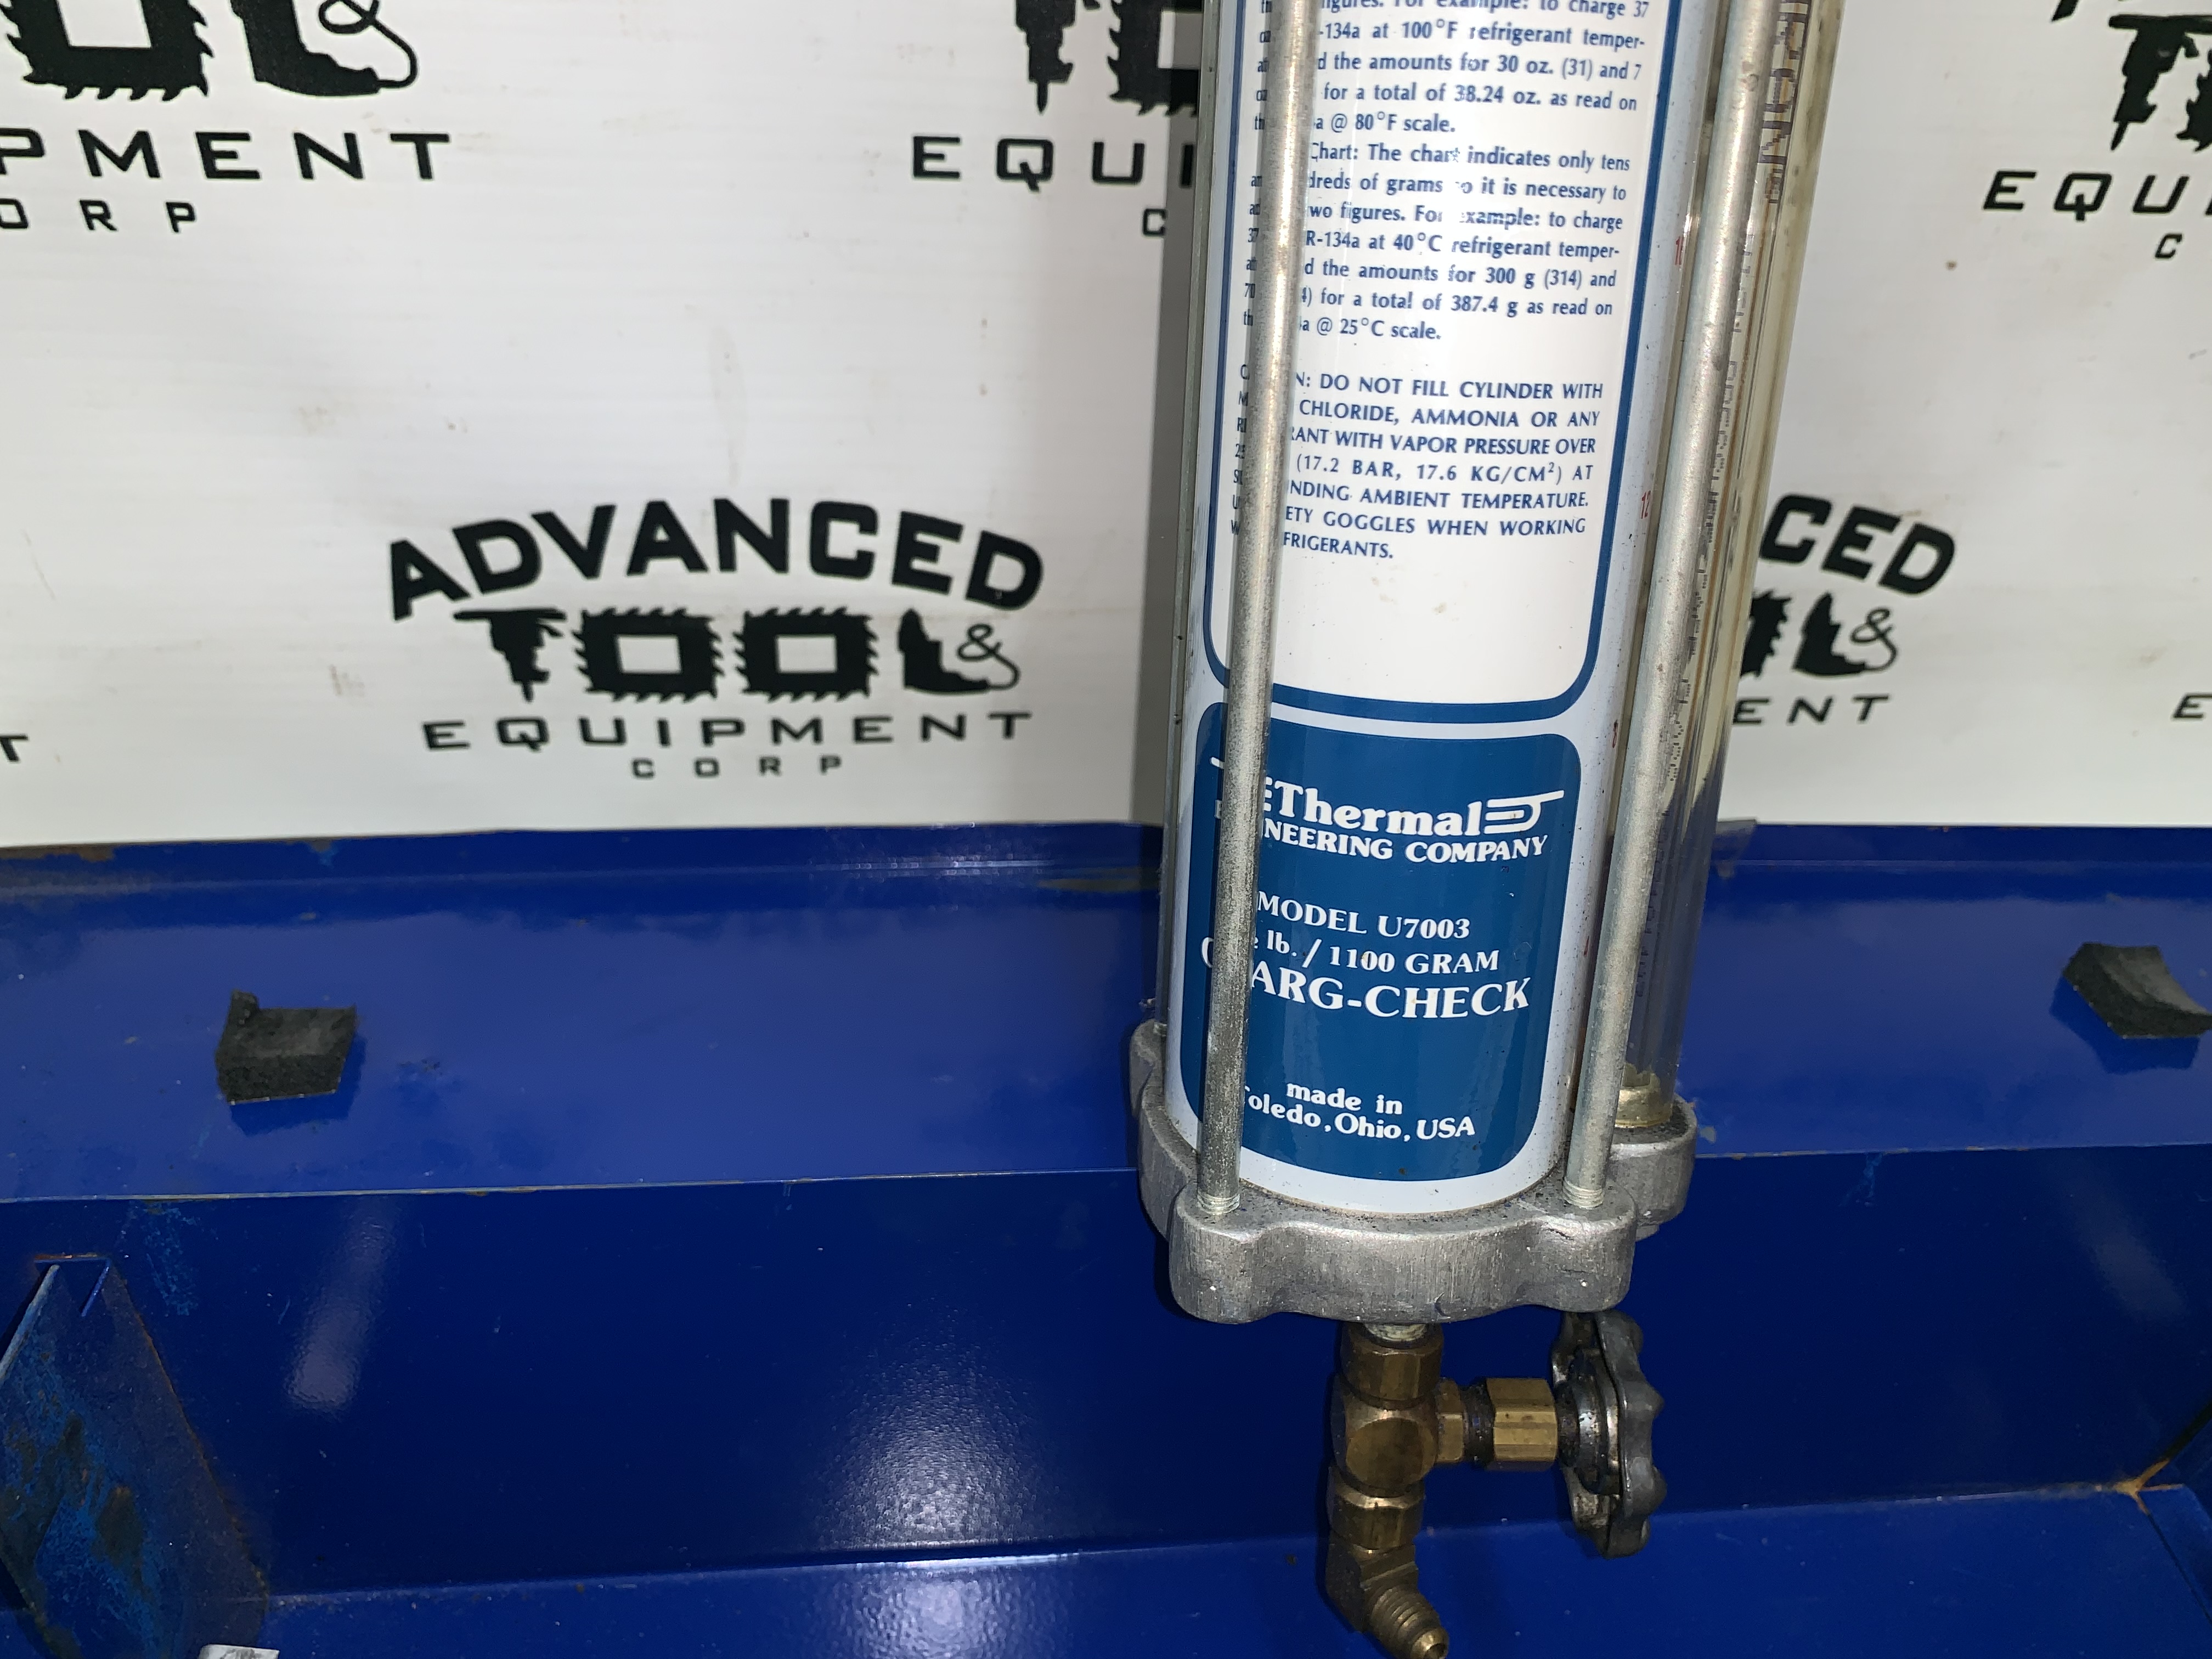 Thermal Engineering Refrigerant Charging Cylinder Charg-check #7009 R12 R22 for sale online 